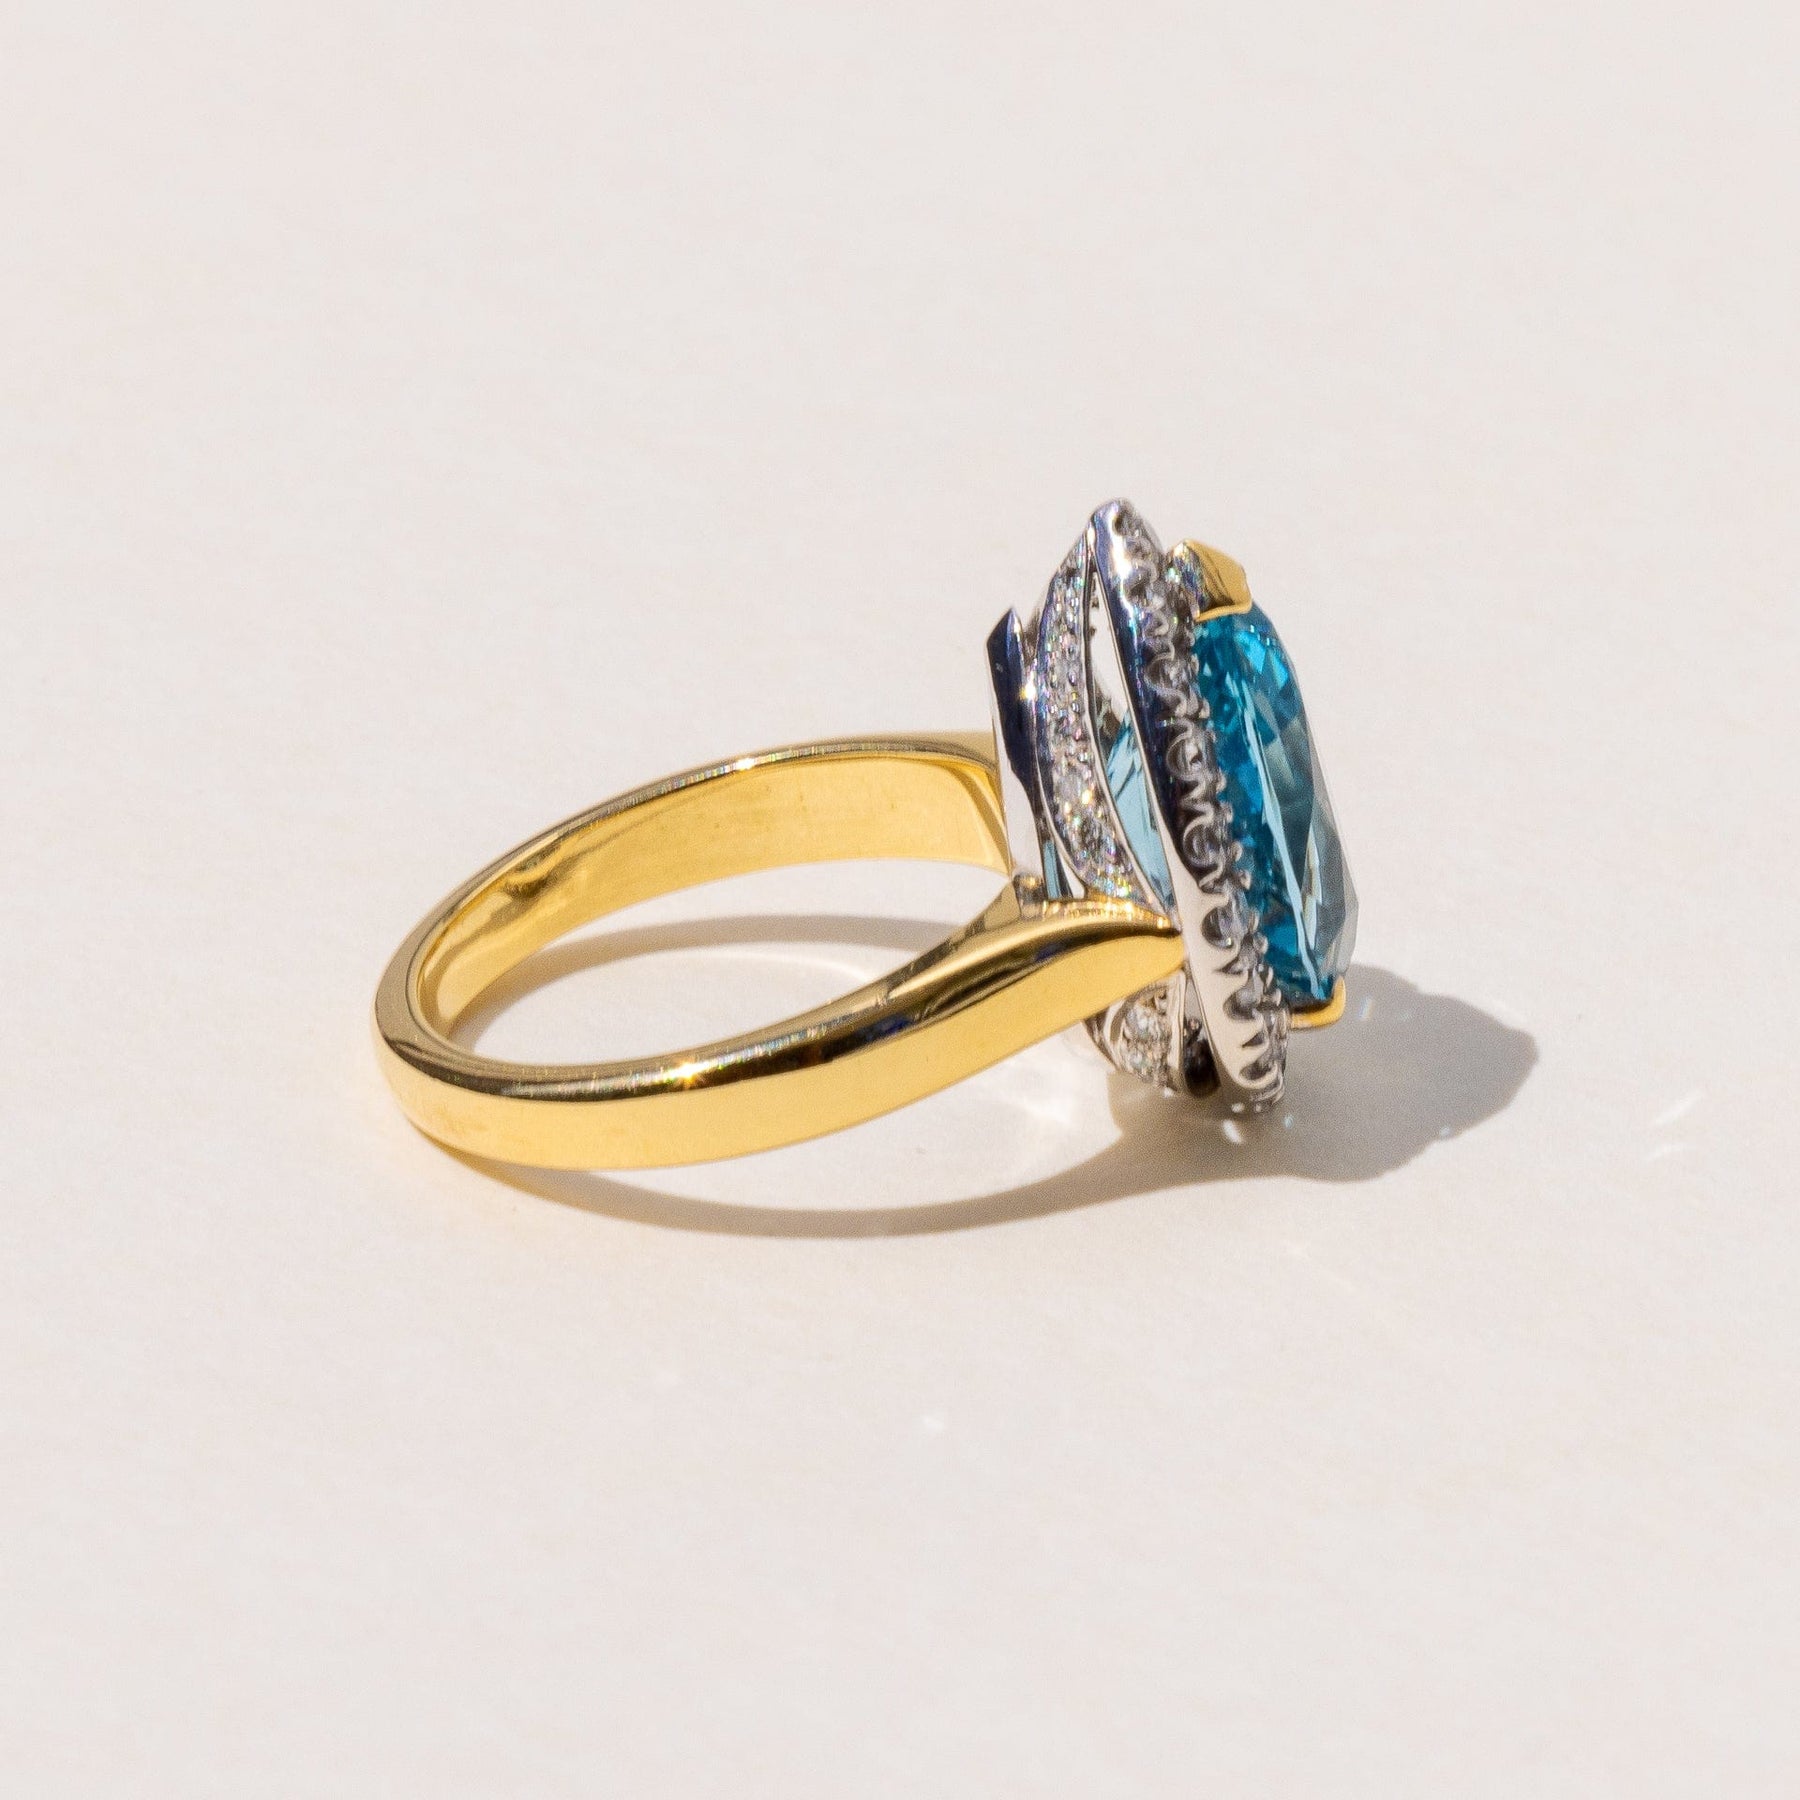 Bespoke  Large Aquamarine Cocktail Ring in 18ct Yellow Gold by our Master Jeweller